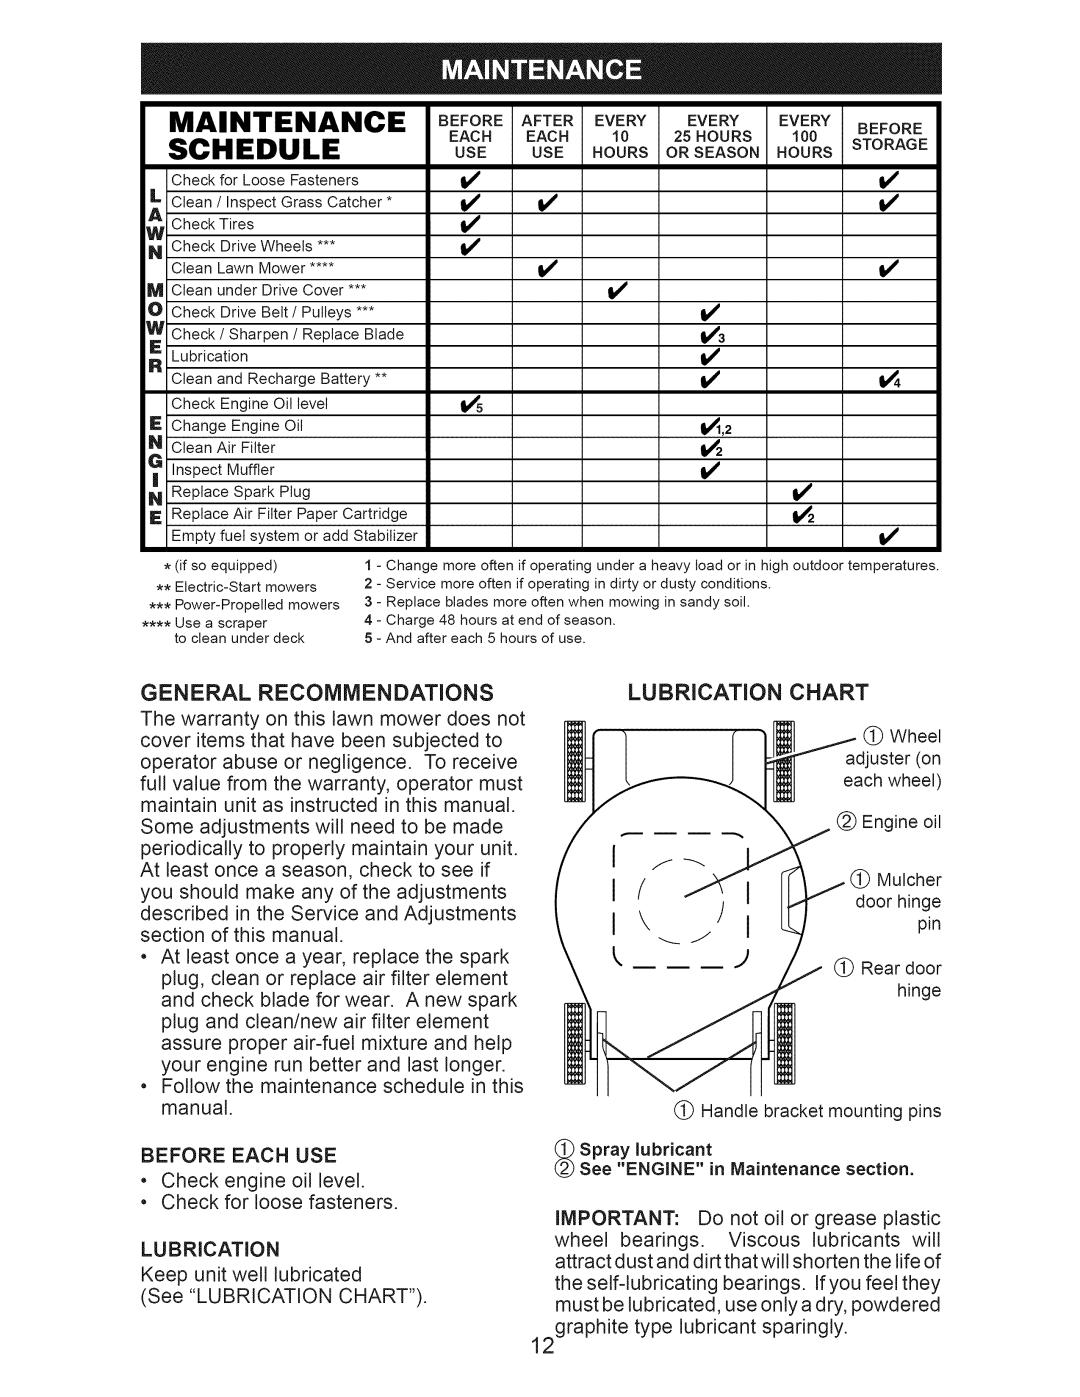 Craftsman 917.374358 owner manual Maintenance, Schedule, Use Hours 